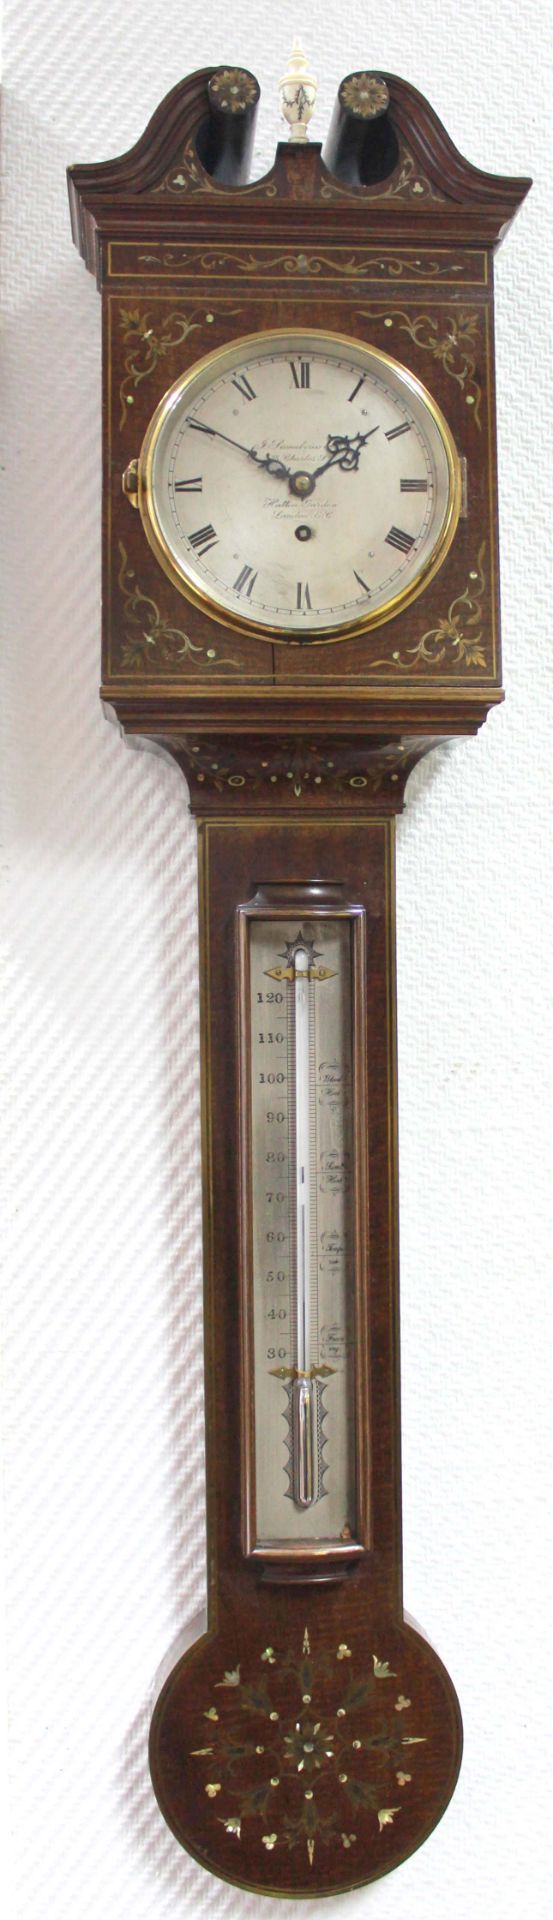 Wall clock with thermometer. "J. Somalvico Co. London".